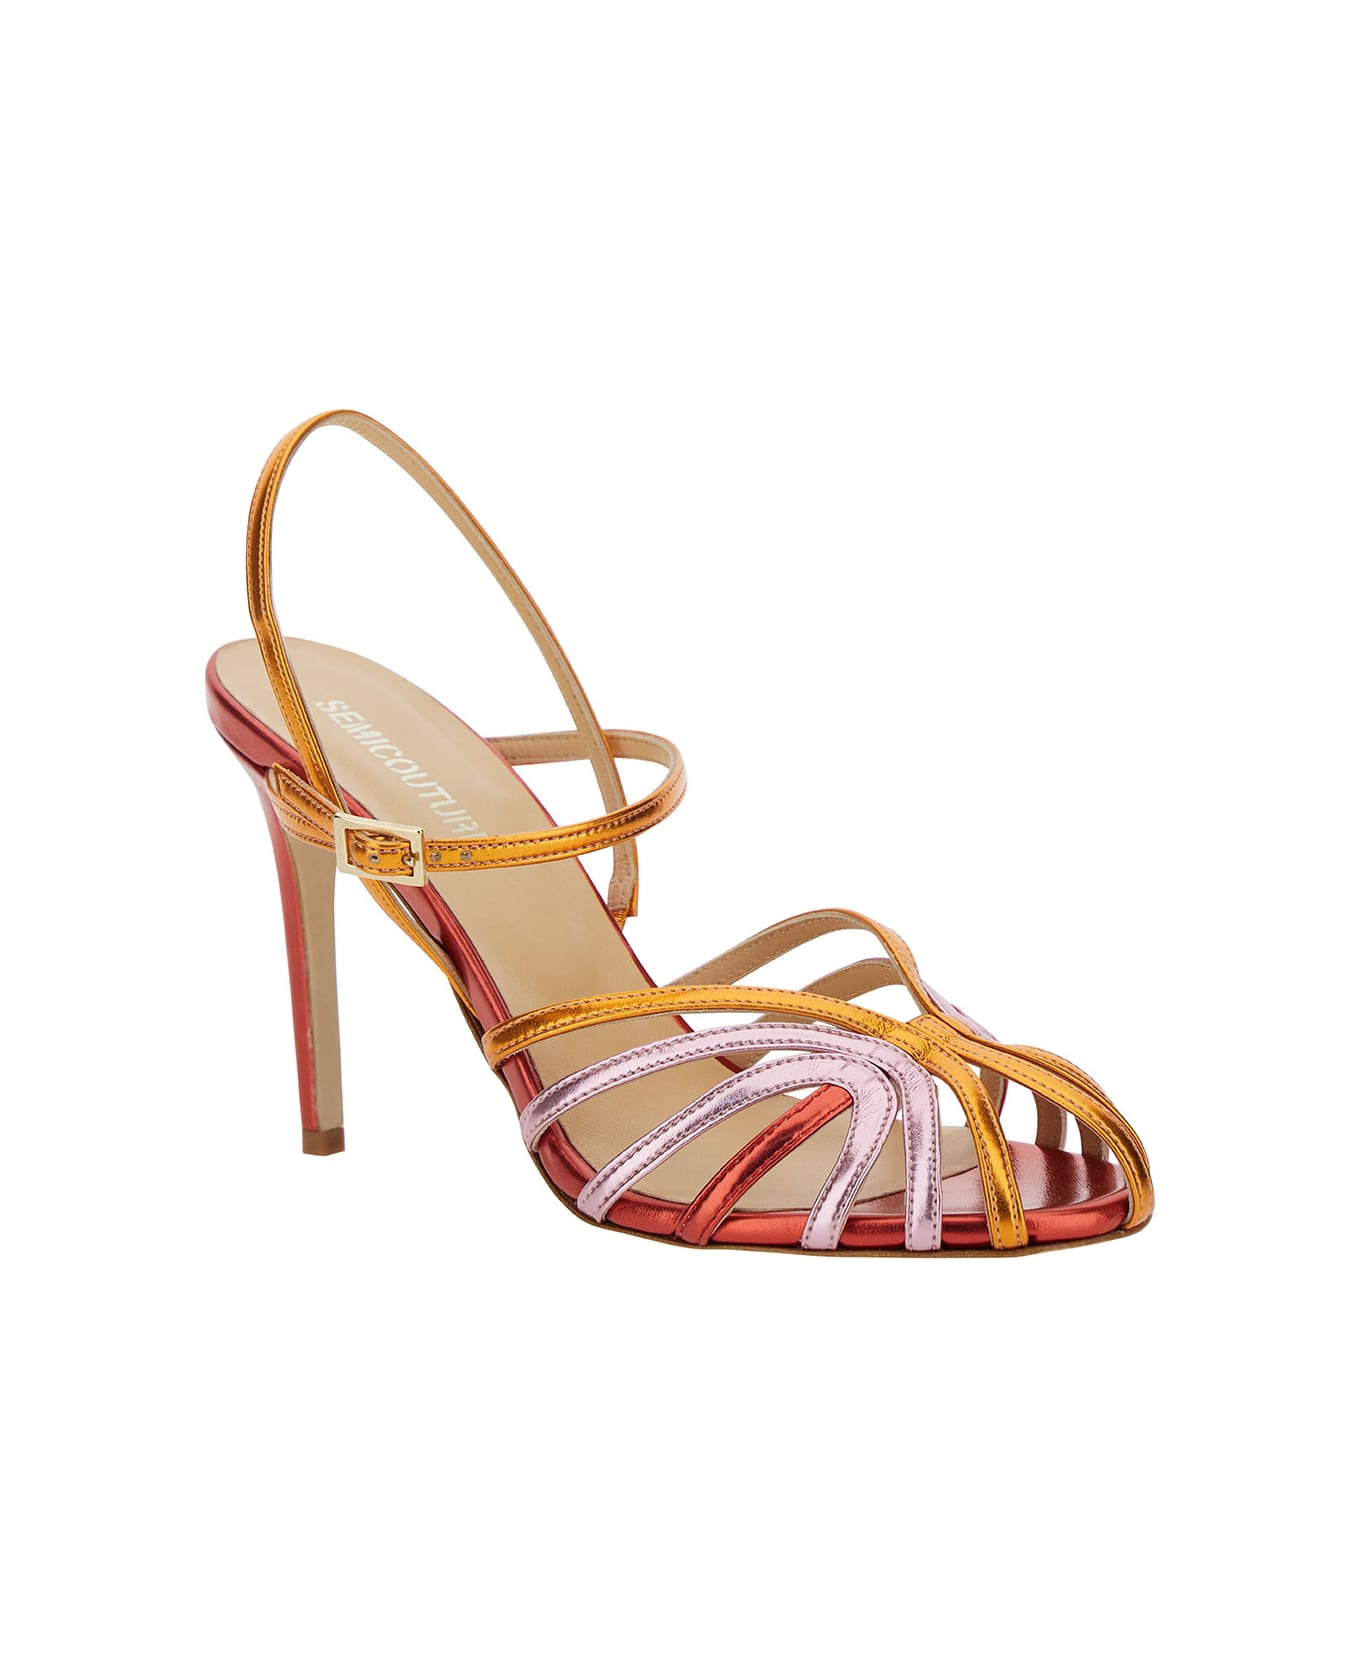 SEMICOUTURE Tricolor Mirrored Sandal With Front Cage In Faux Leather Woman - Multicolor